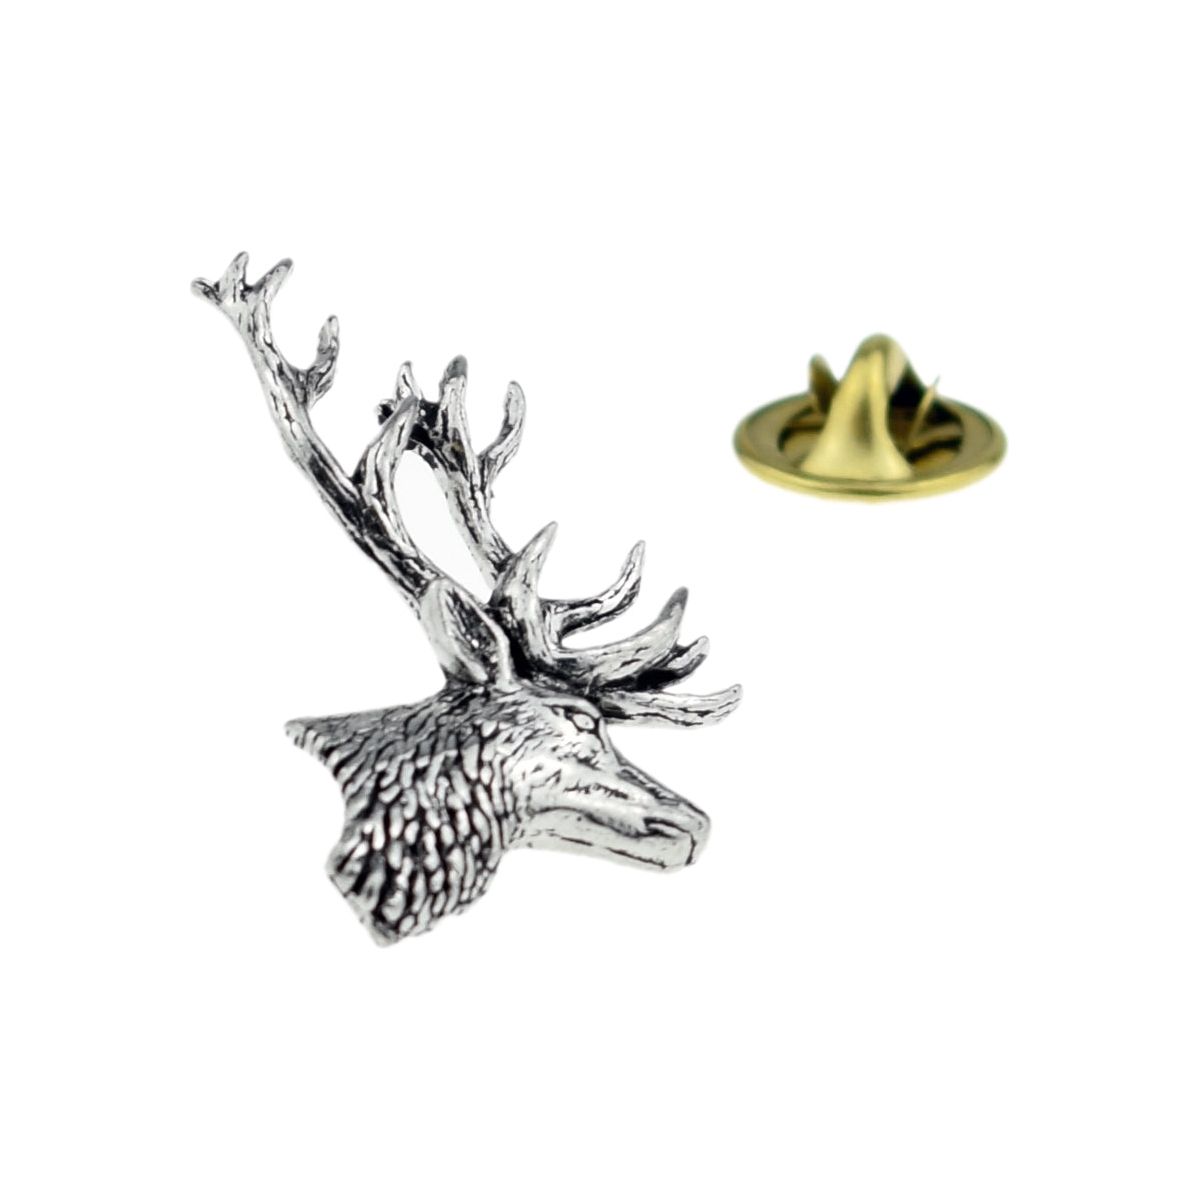 Stags Head English Pewter Lapel Pin Badge - Ashton and Finch